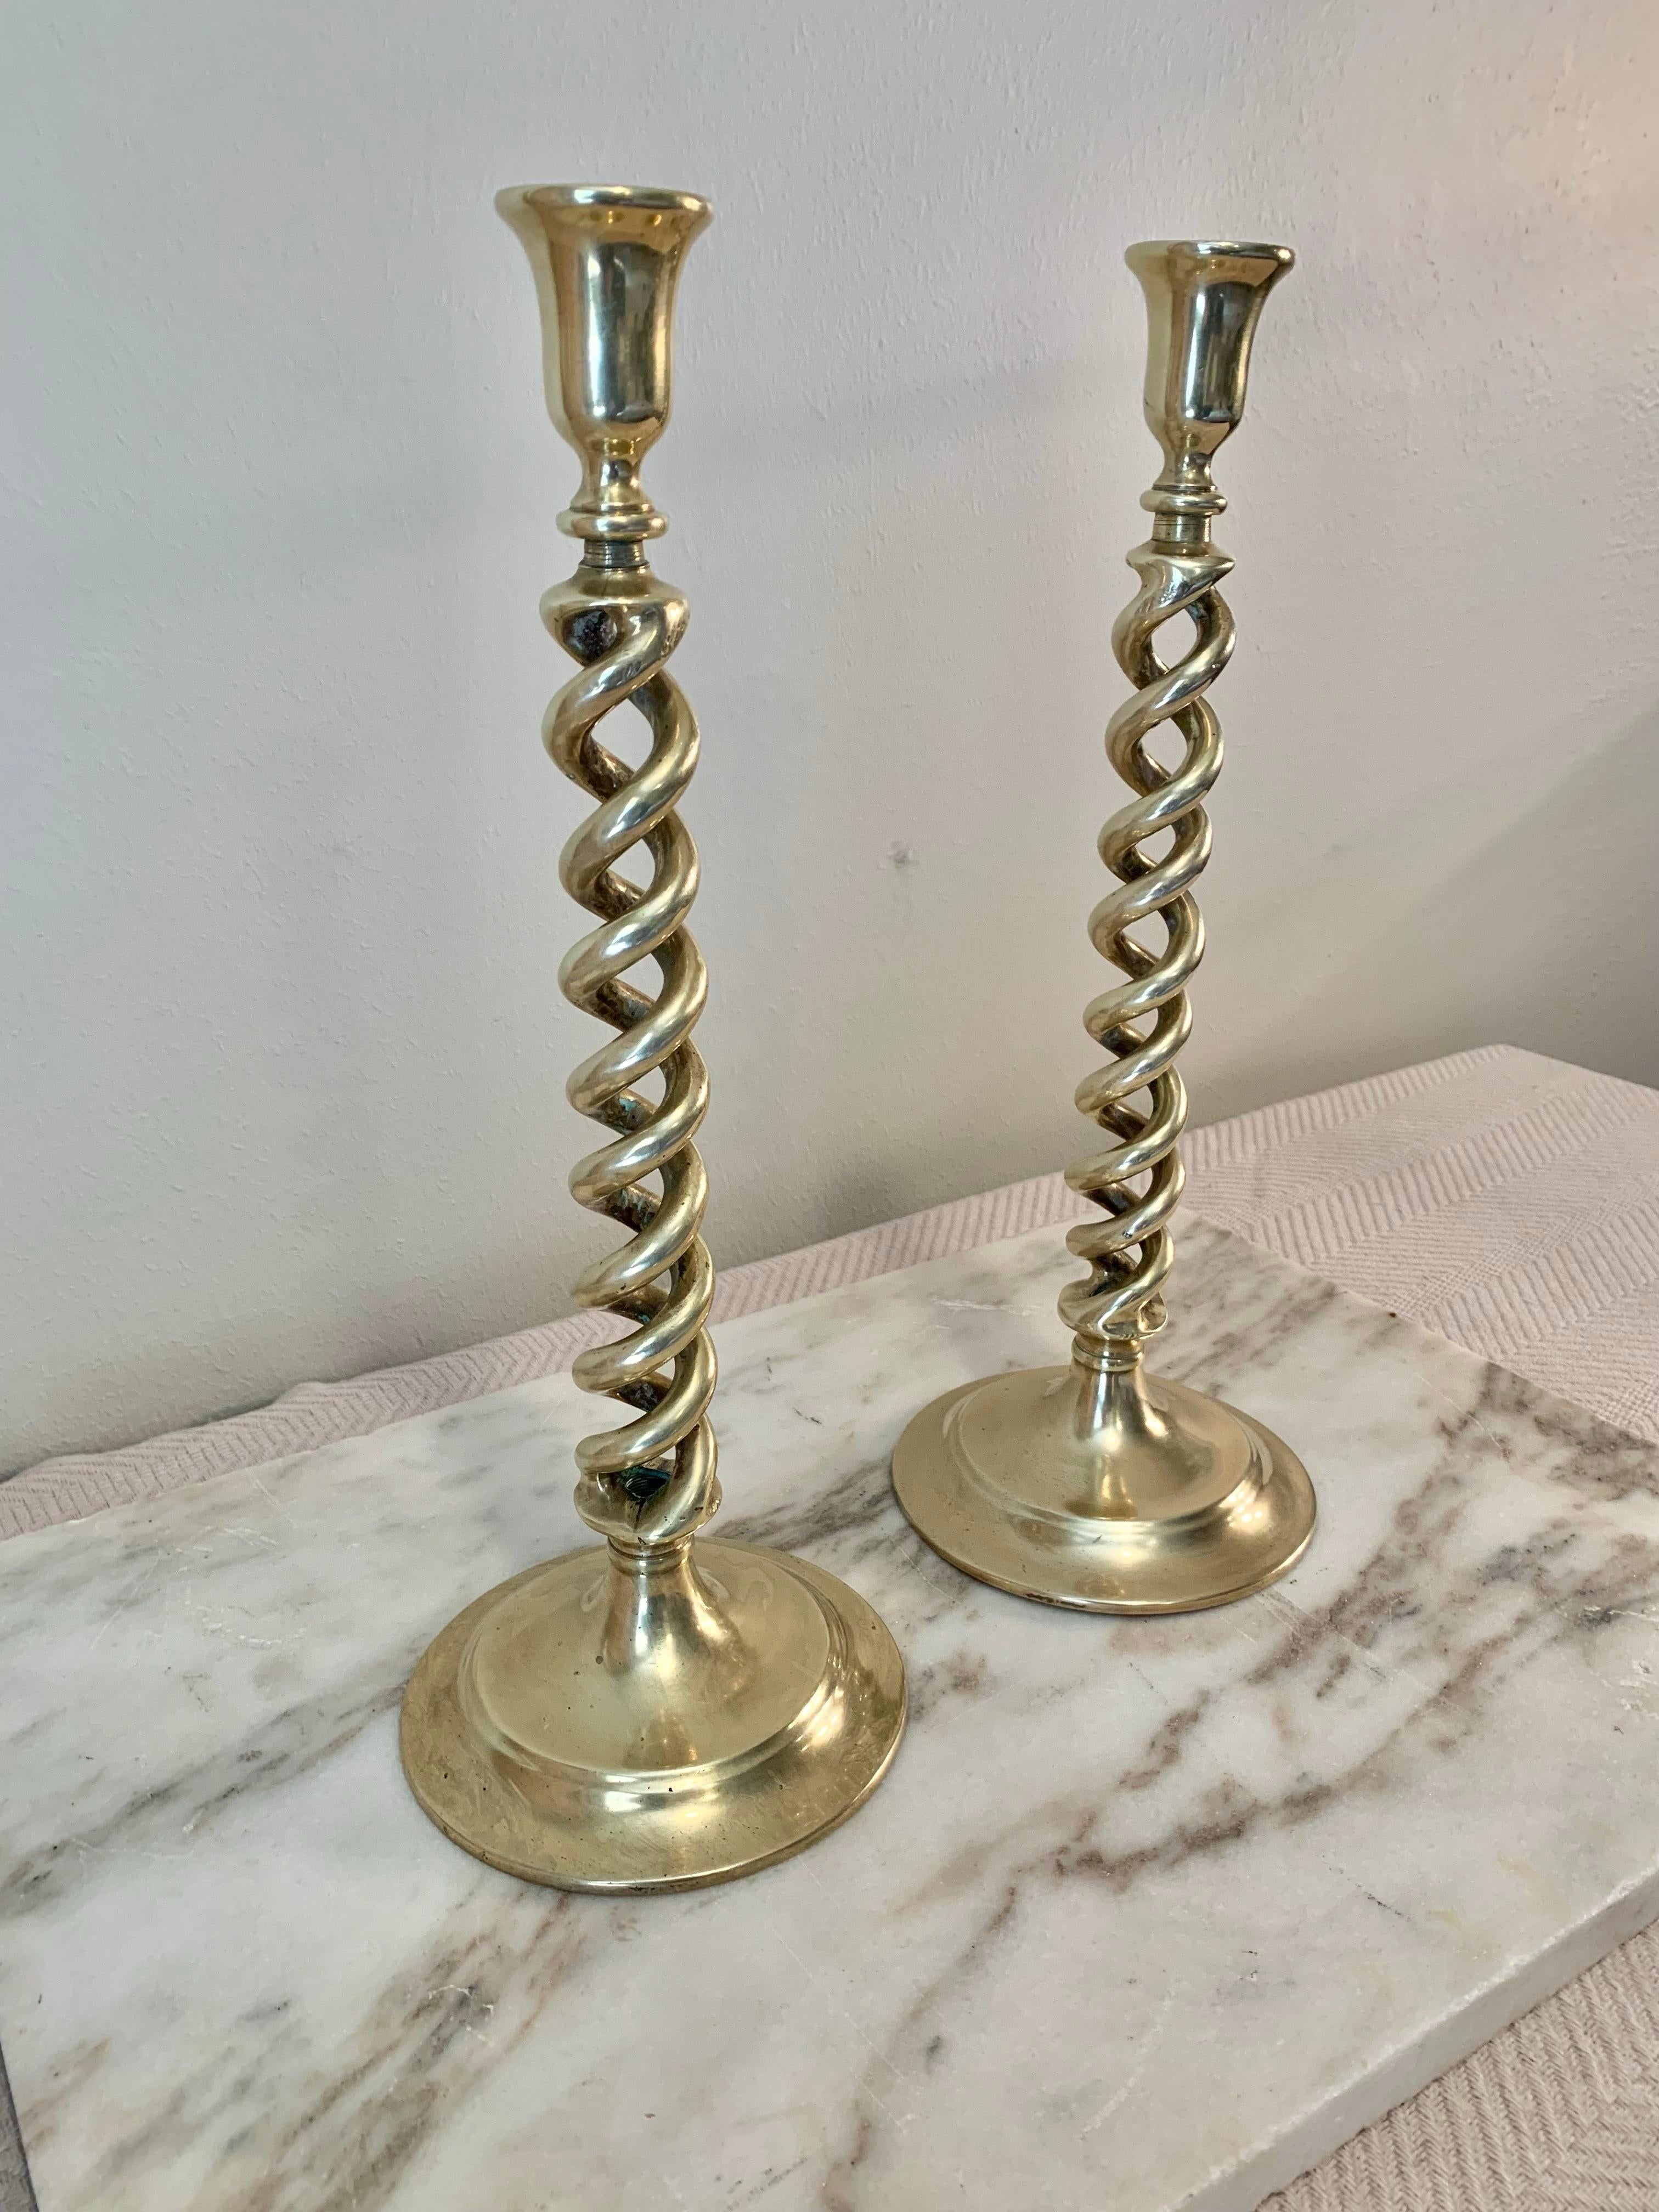 Found in England, this pair of Brass Barley Twist Candlesticks were handcrafted in the early 1920's by English Artisans. Each candlestick features a double twist body or open barley twist that rest below the candle holder and finished with a round